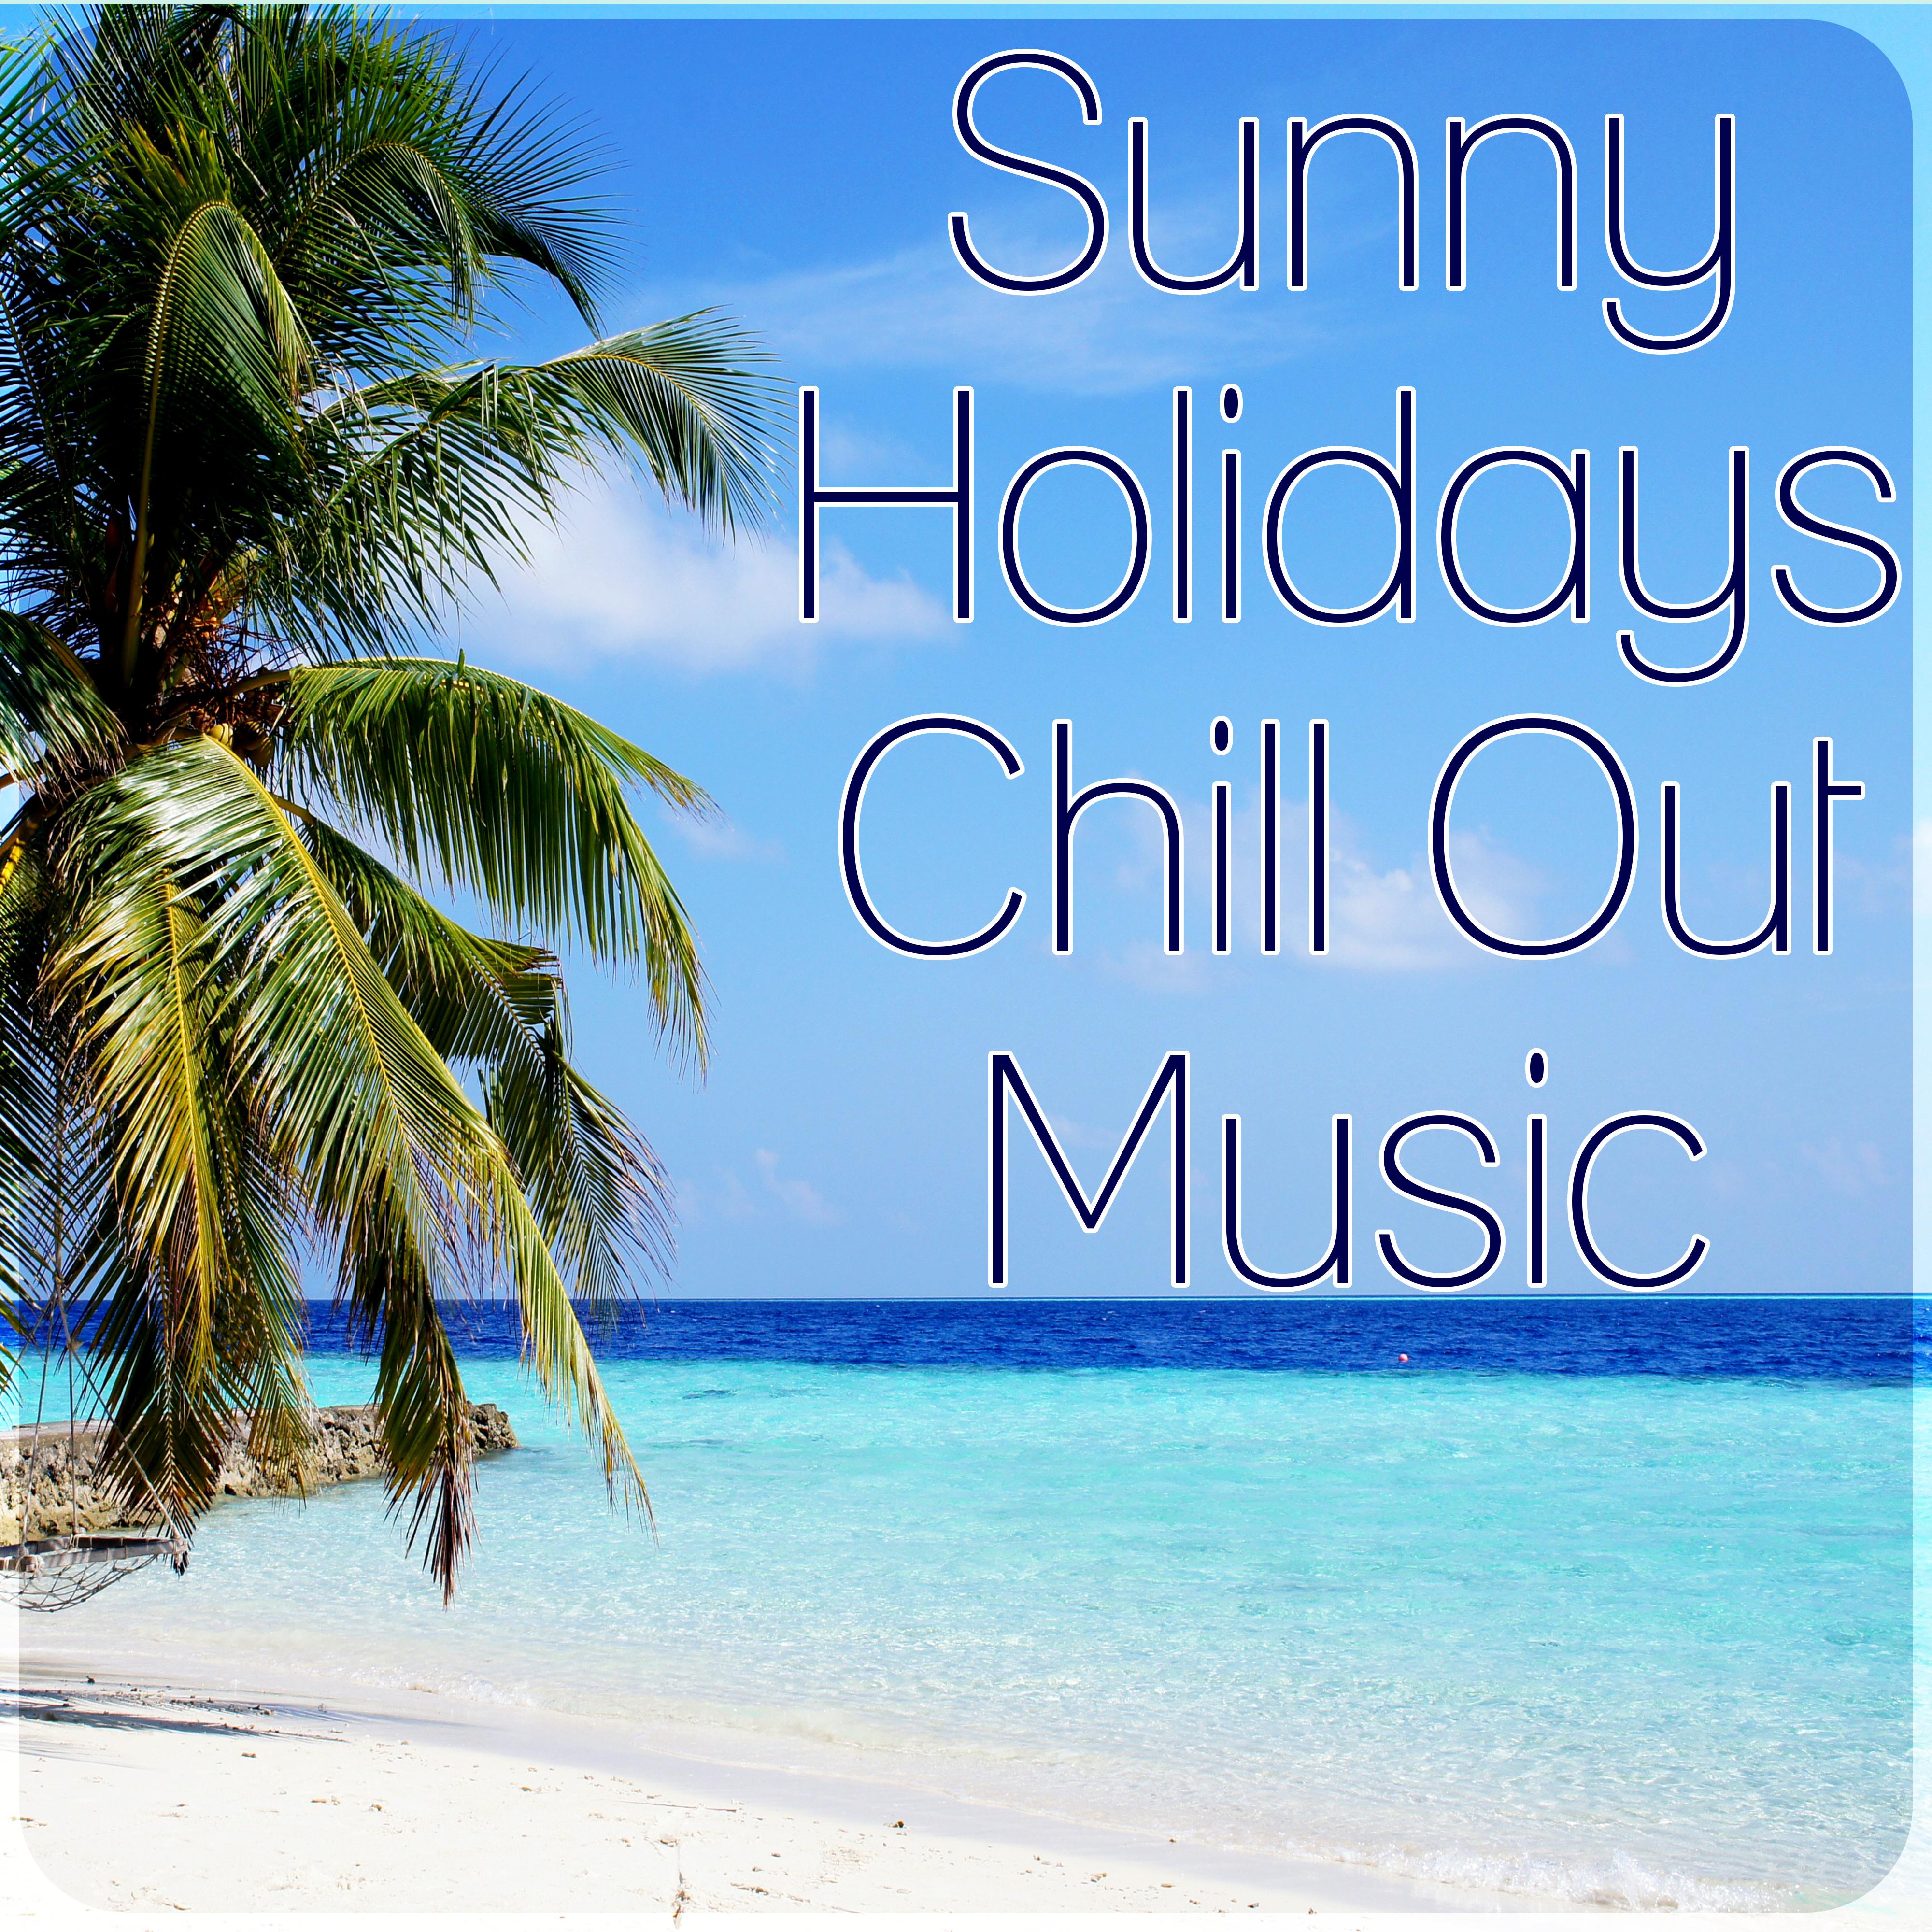 Sunny Holidays Chill Out Music  Chill Out Music to Dance, Lounge Summer, Wild Journey Tropical Lounge, Positive Energy, Deep Vibes, Tropical Sounds, Chill Out Music